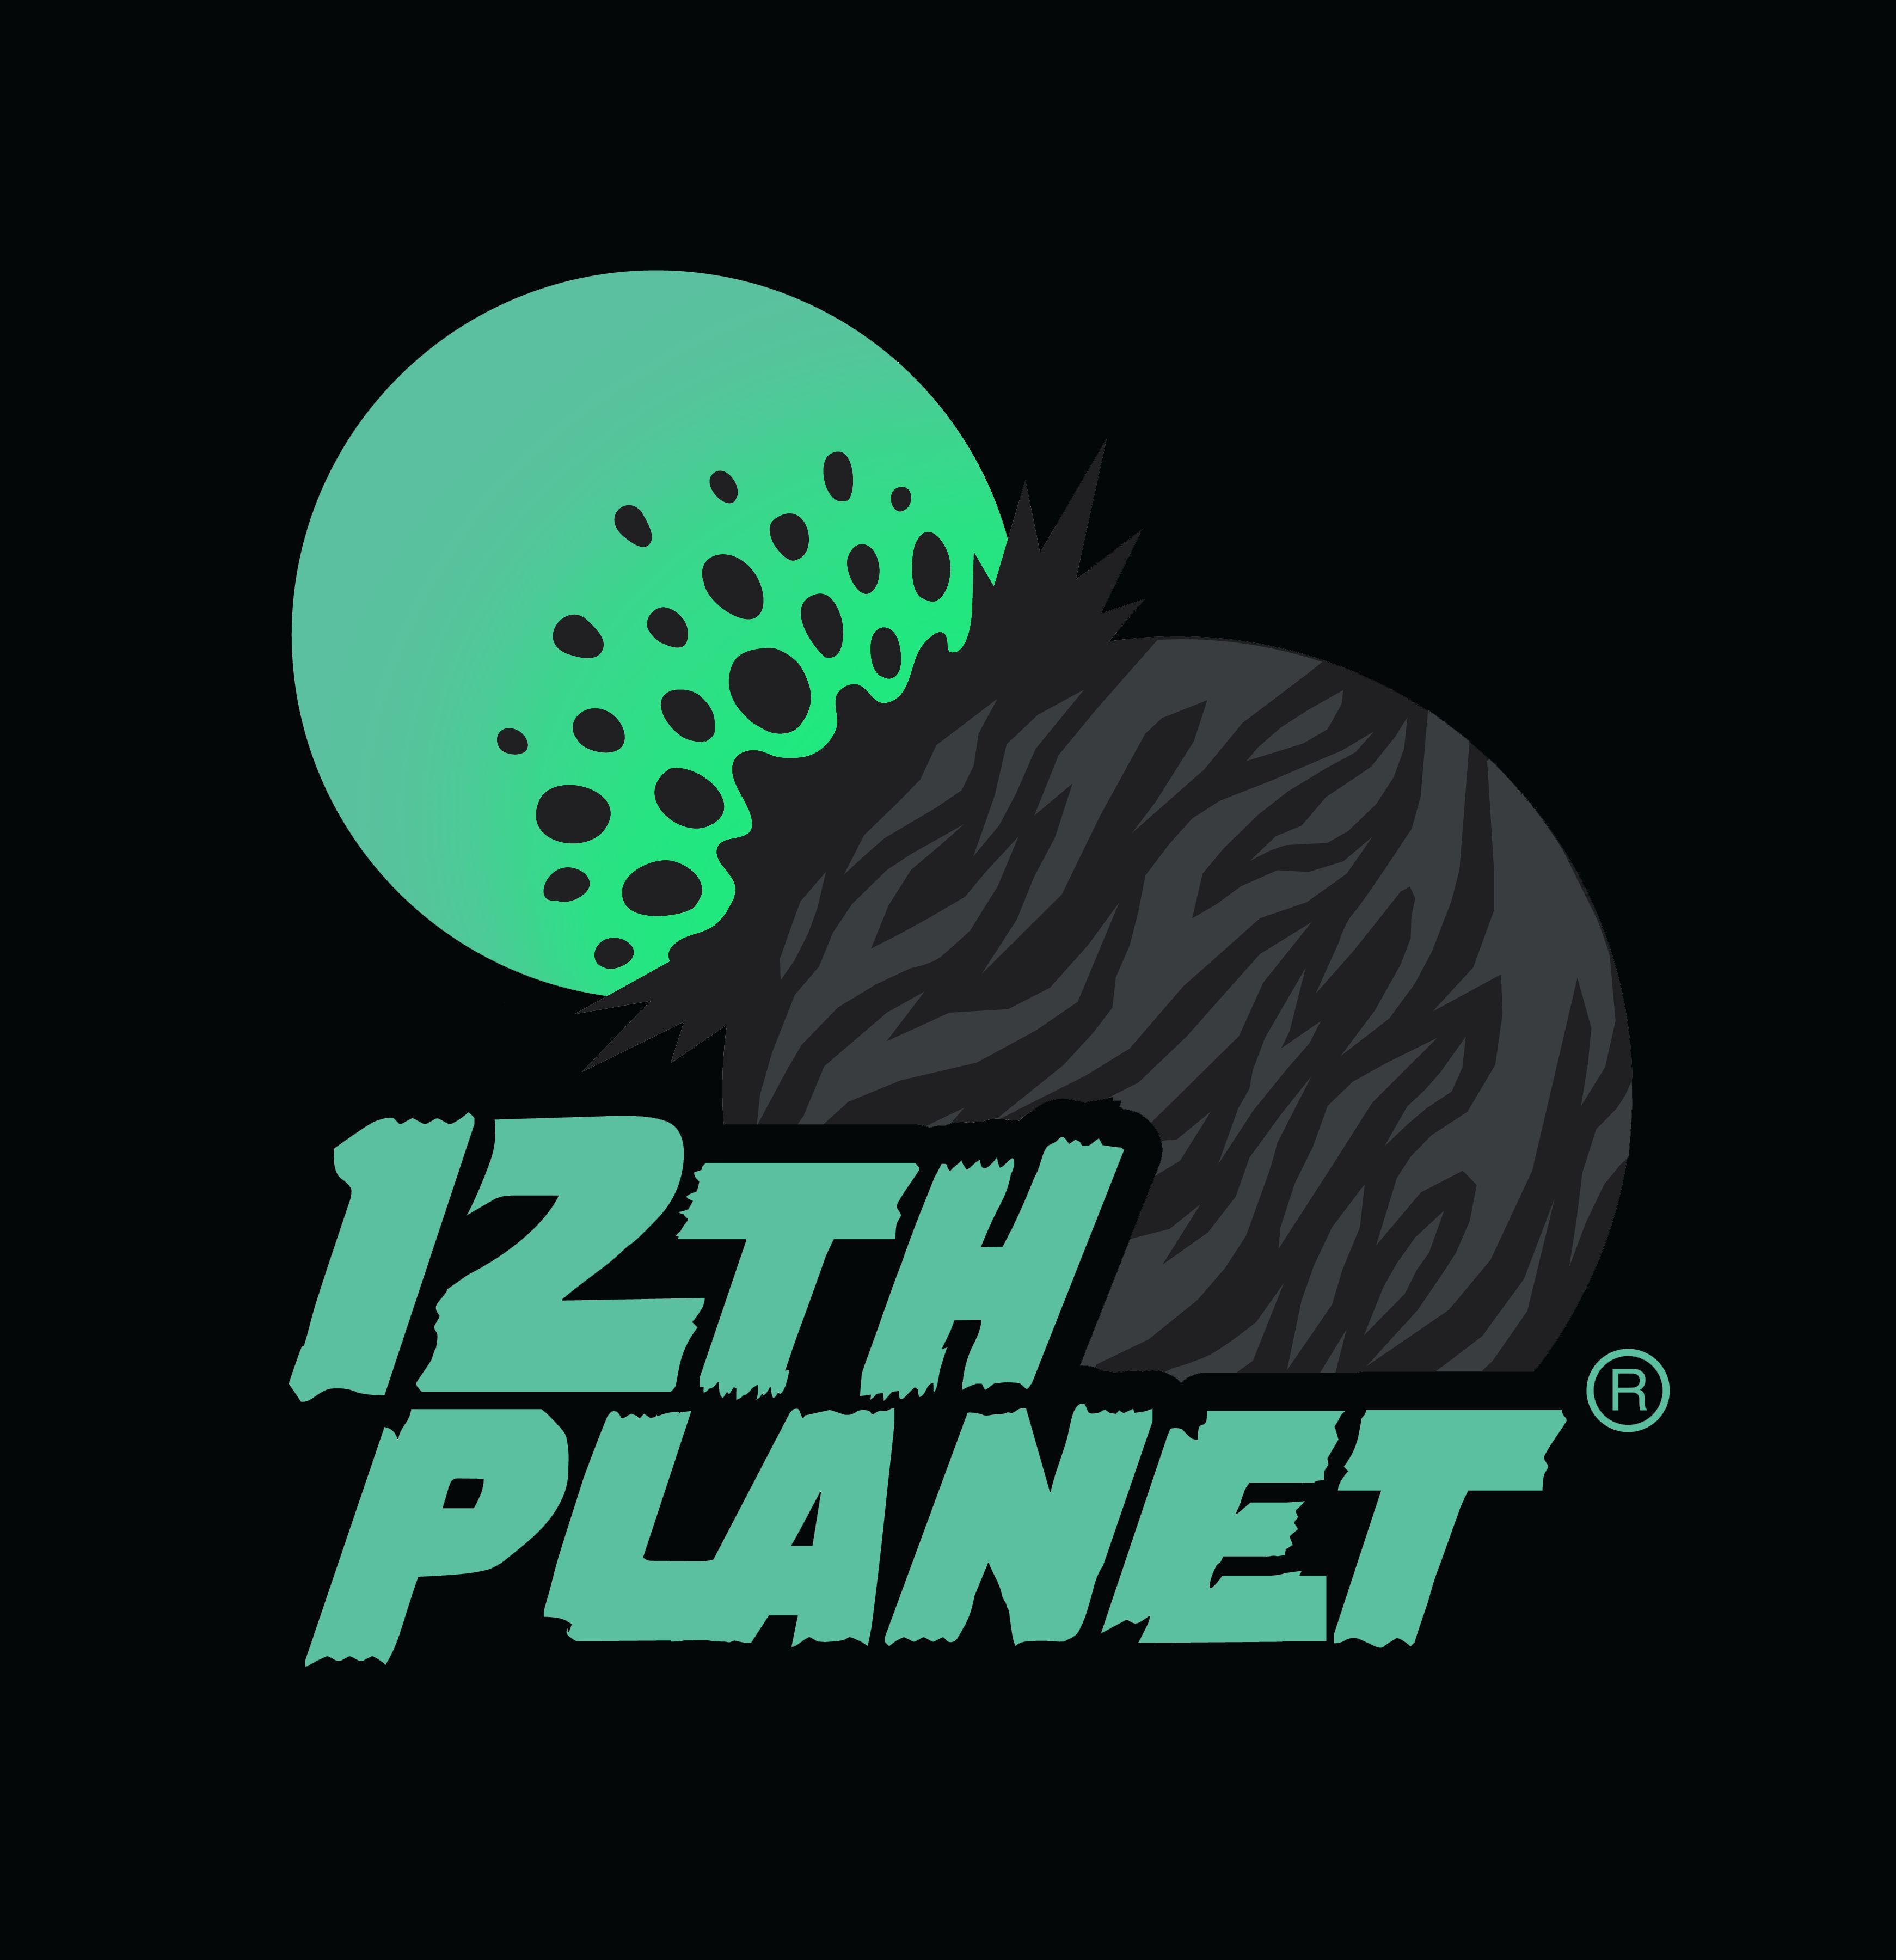 12th Planet Profile Link